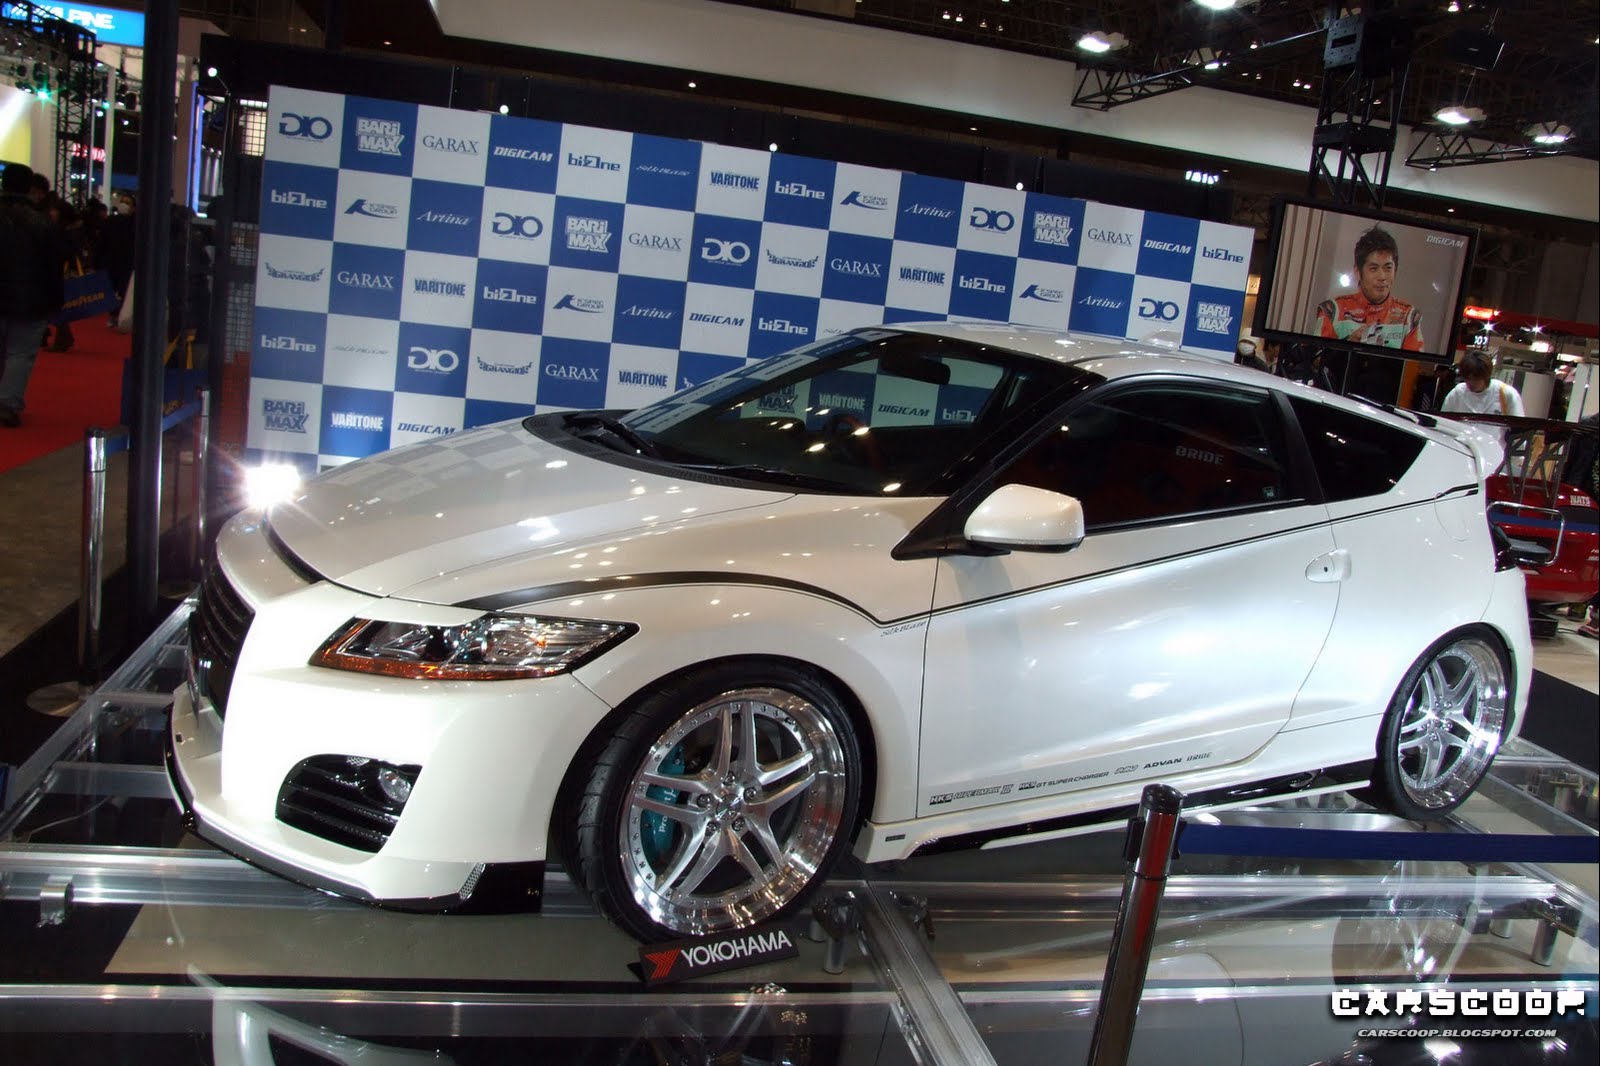 Pick of the Day: 2011 Honda CR-Z, it was customized on Mythbusters